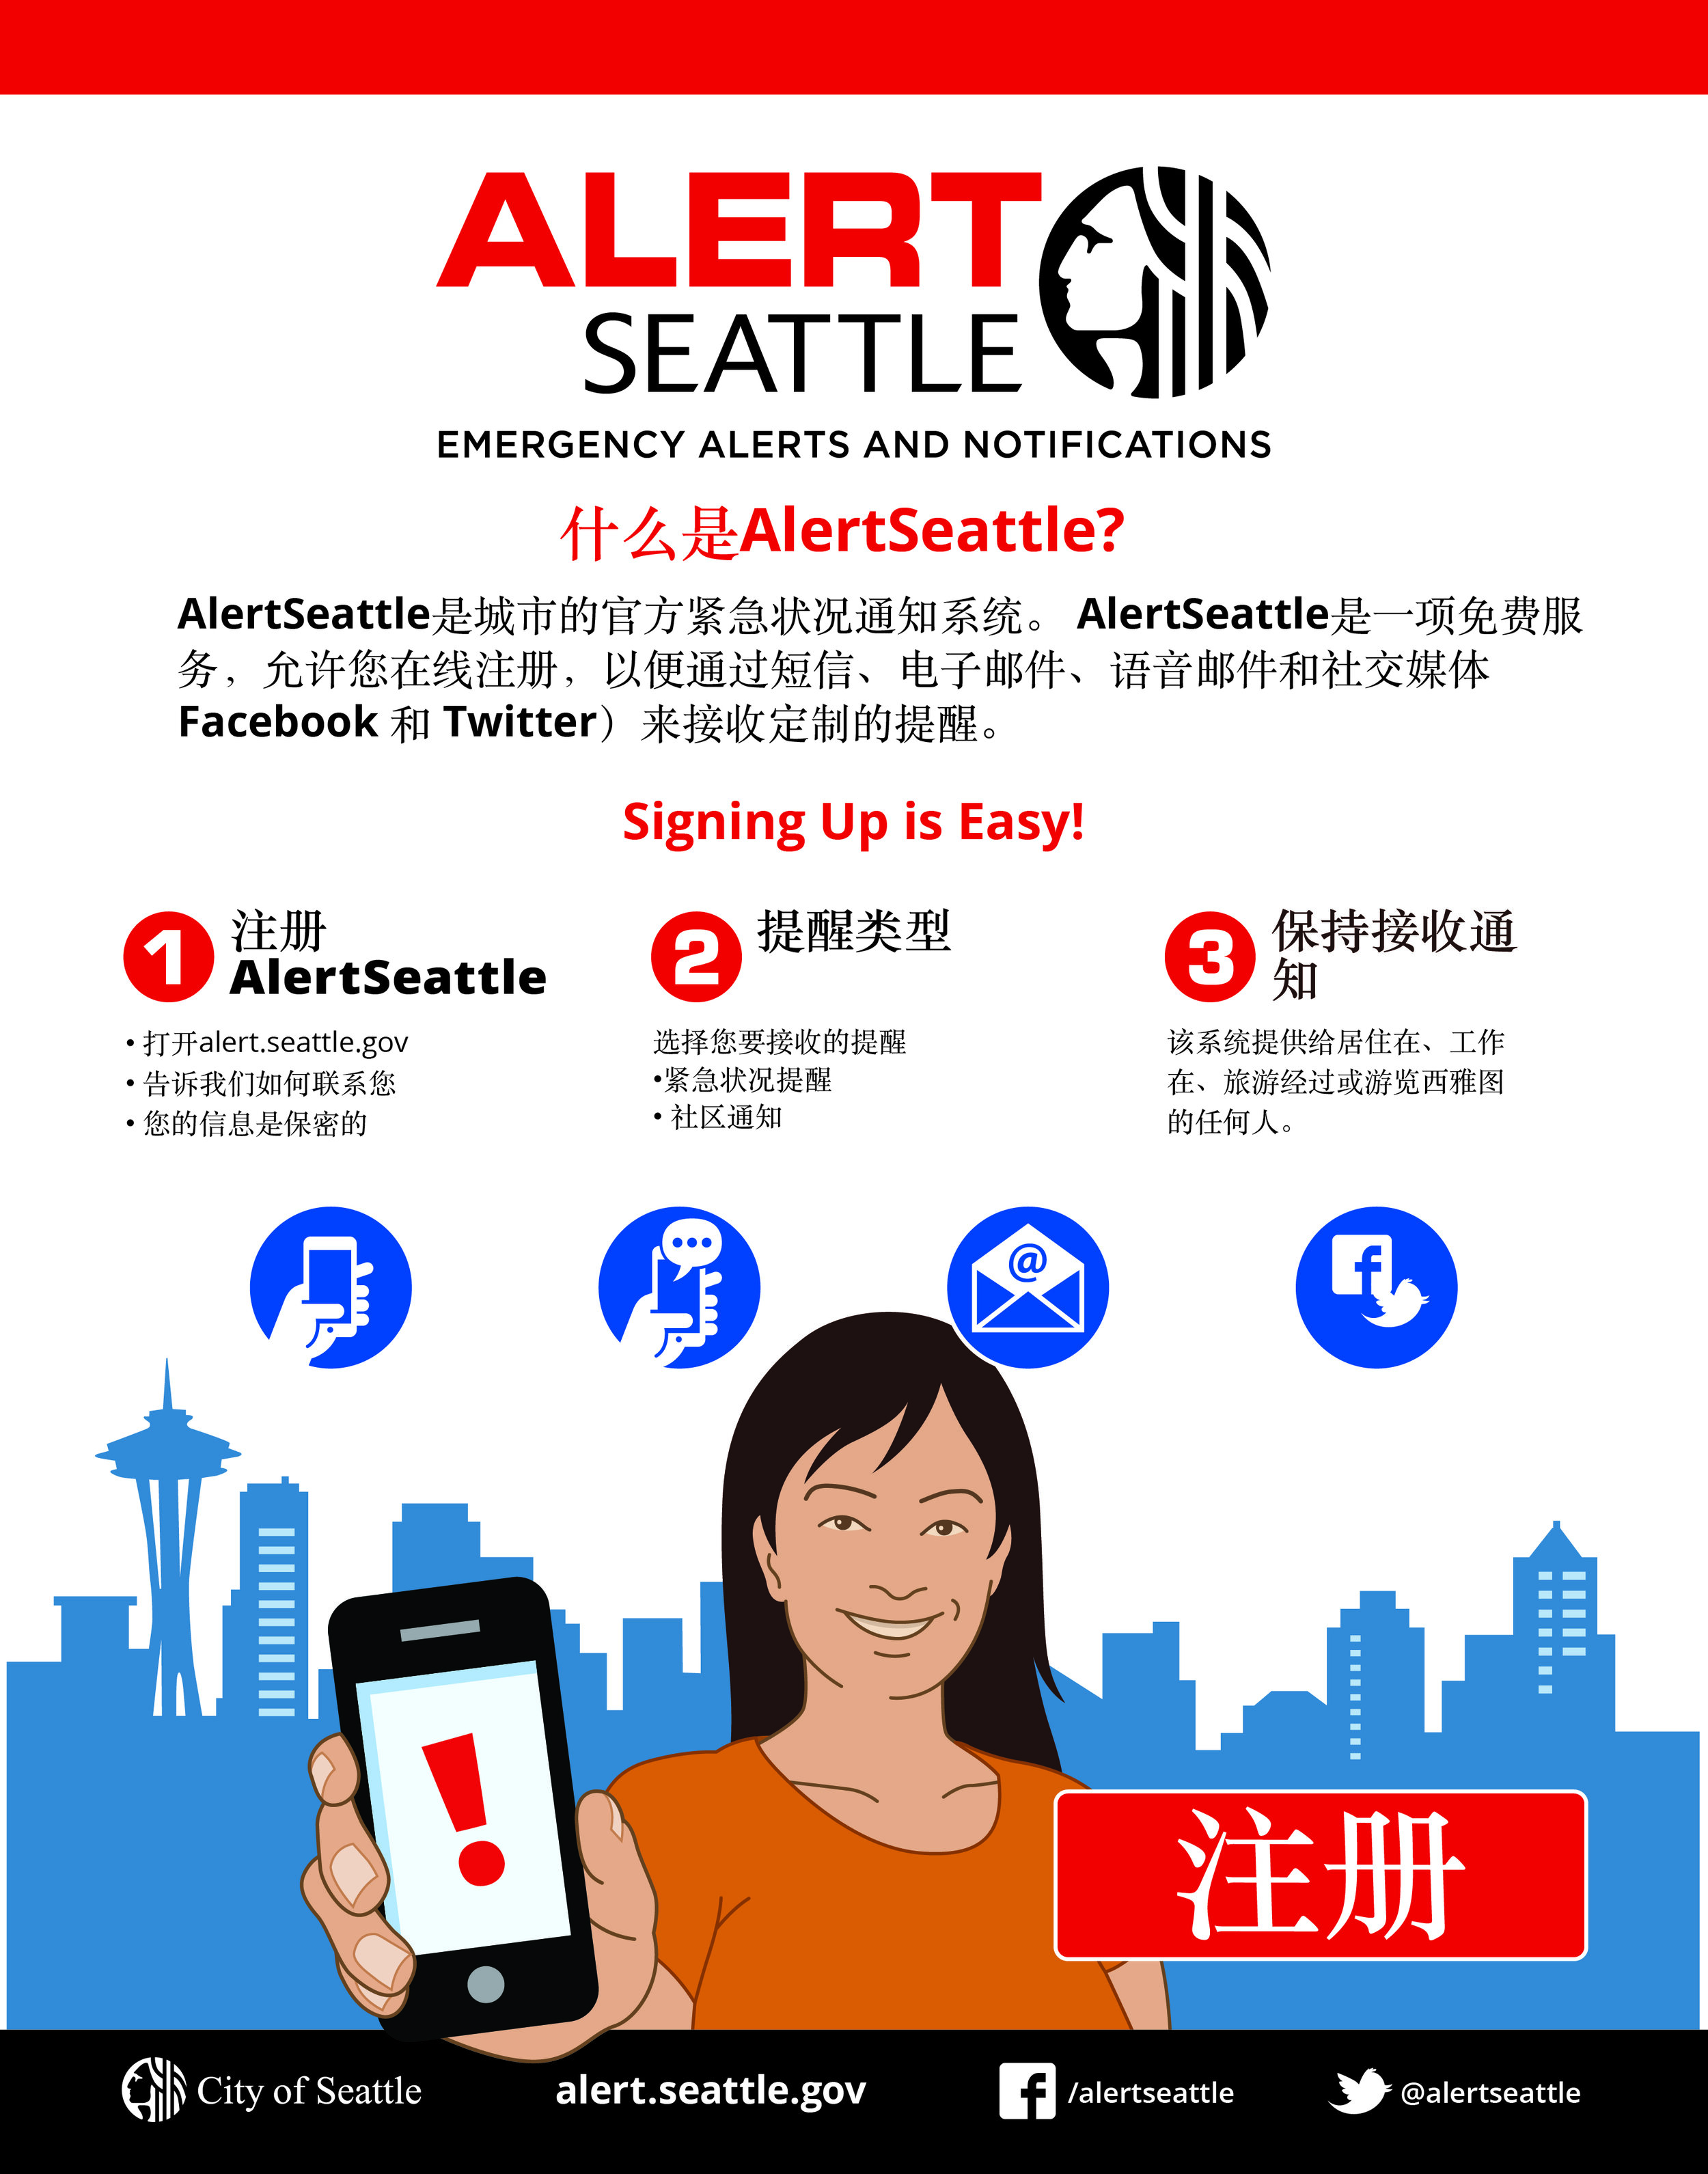 ALERTSeattle Print Collateral_Seattle Chinese Post.jpg